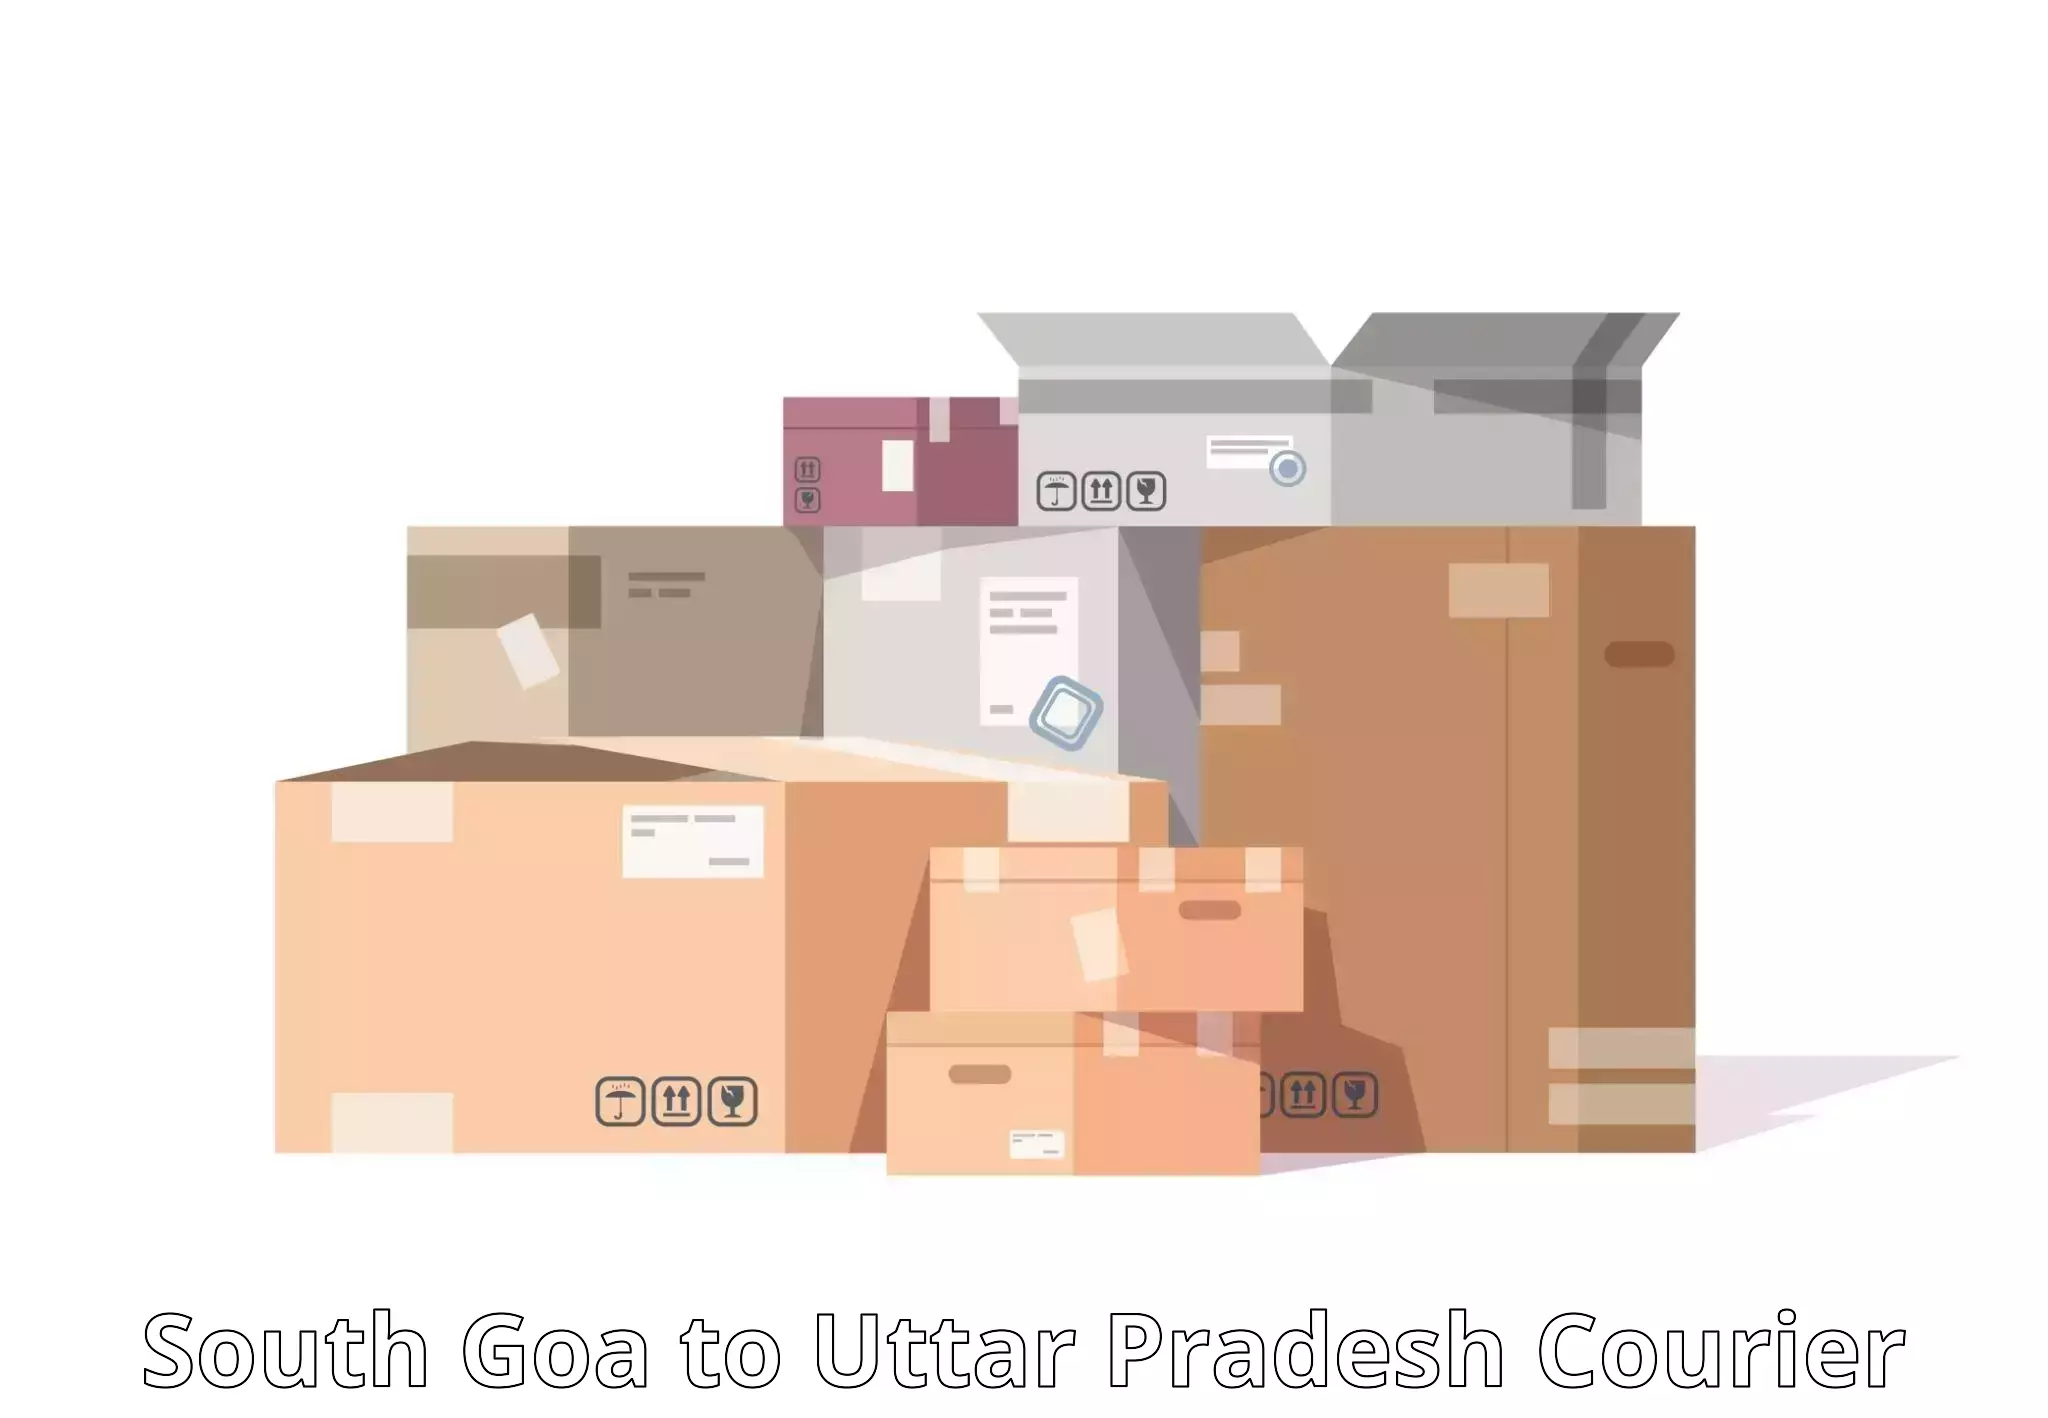 Express courier facilities South Goa to Saharanpur